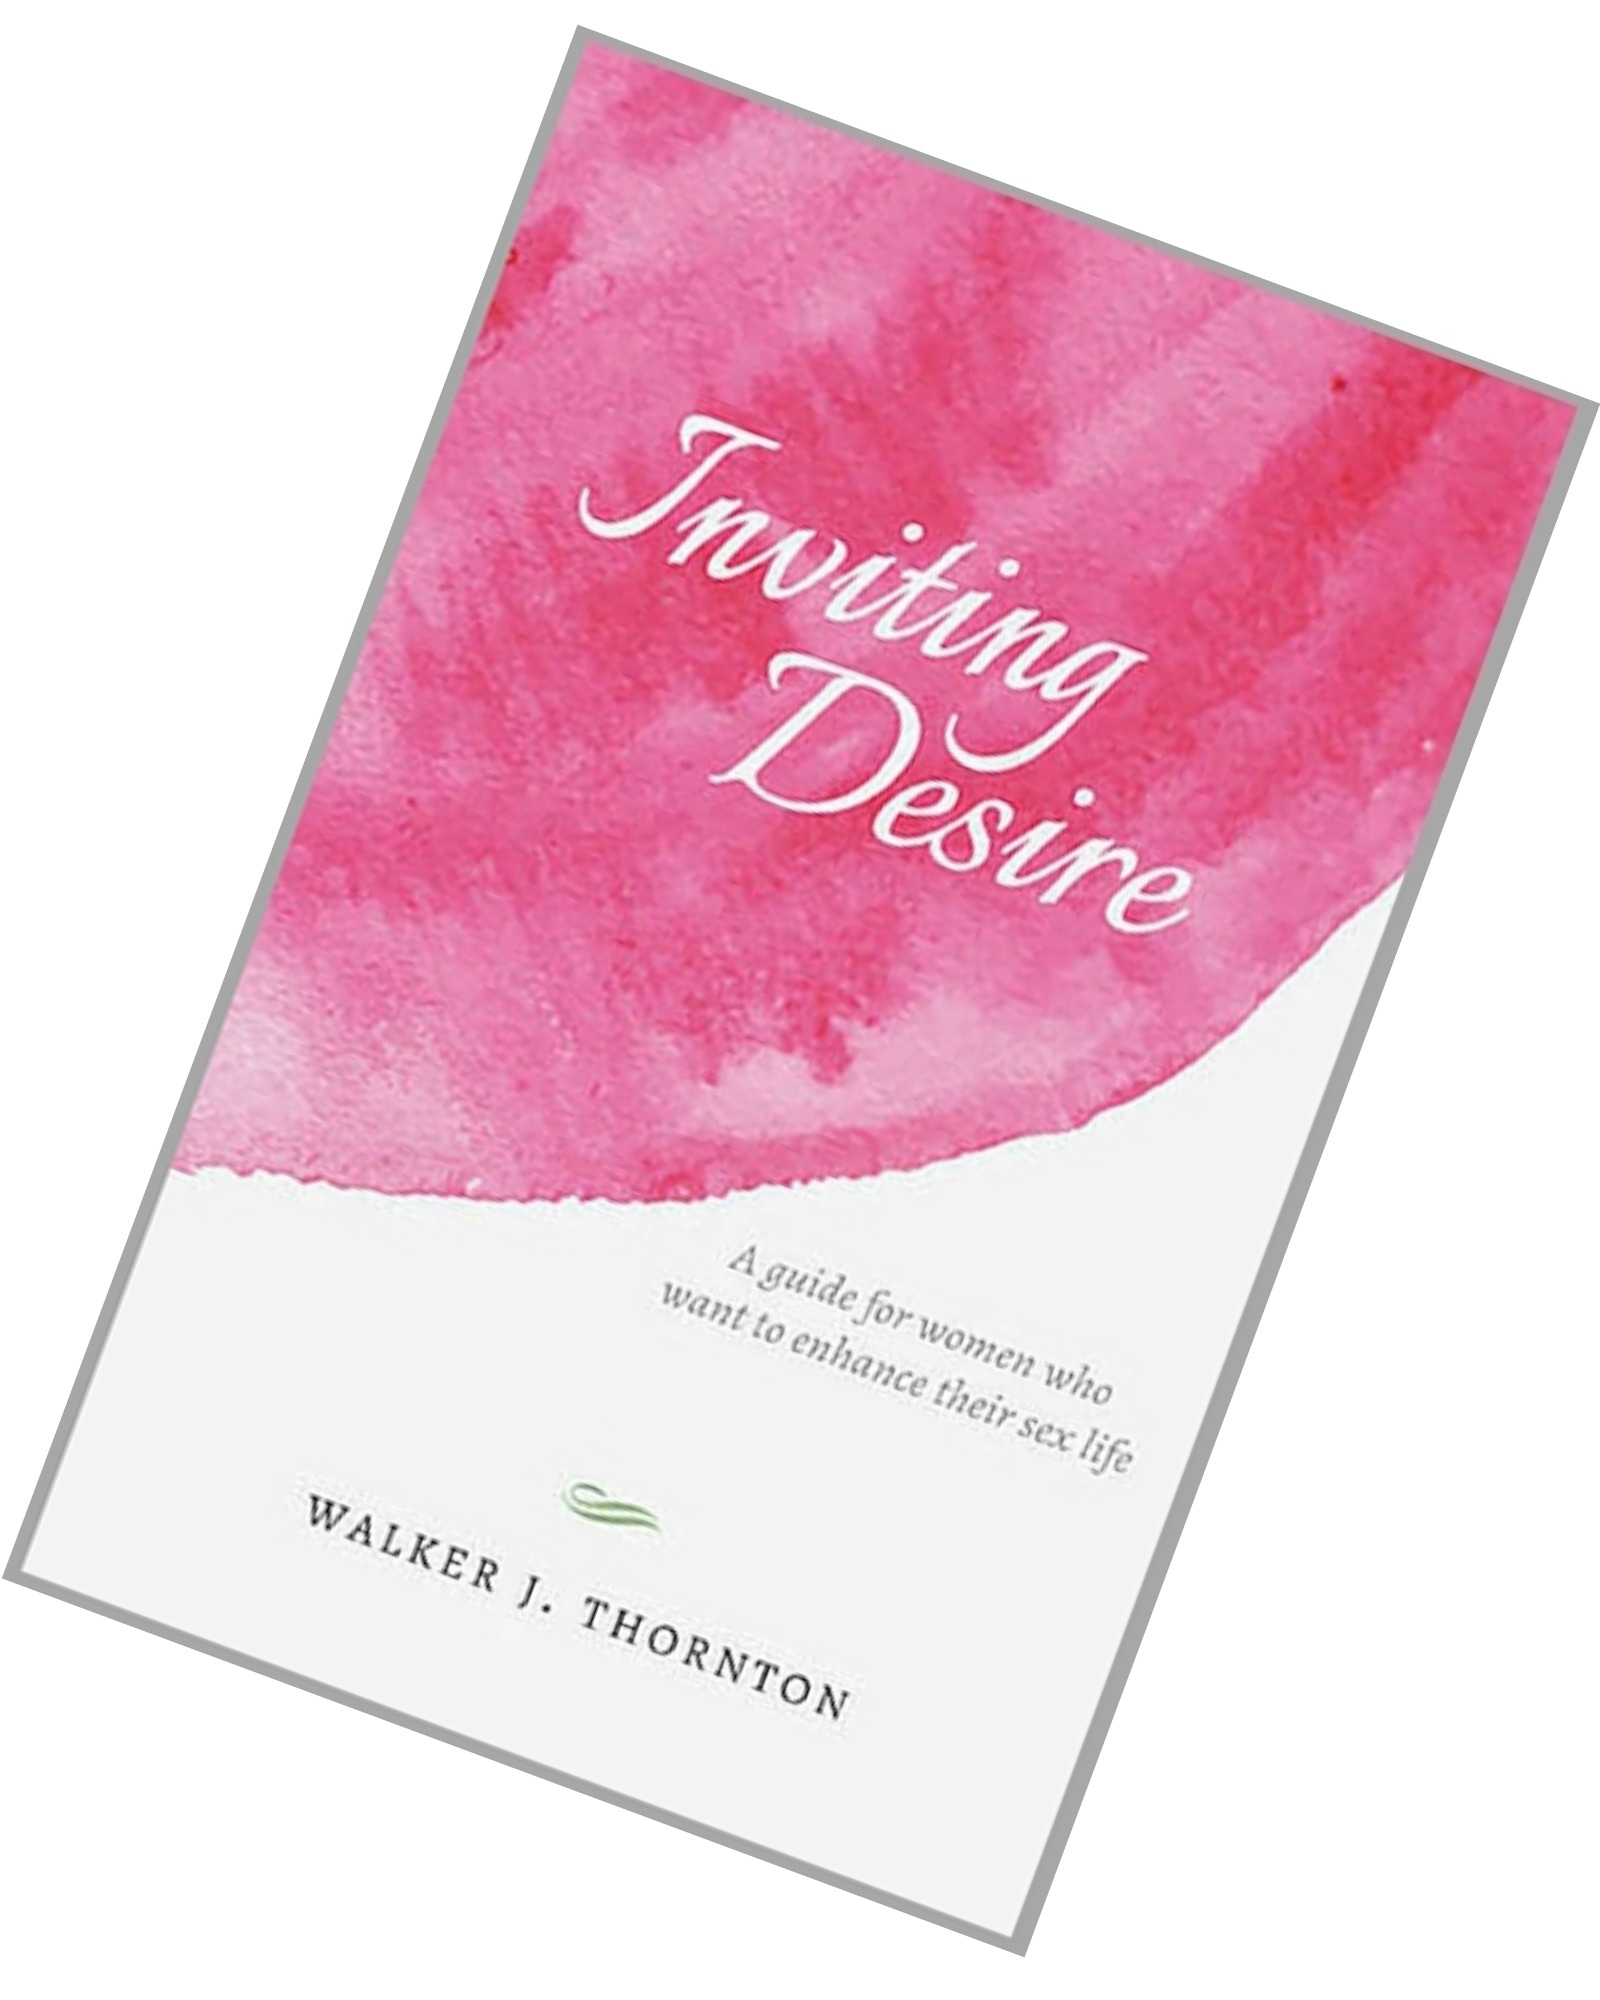 Author Interview: Walker Thornton on “Inviting Desire” and More